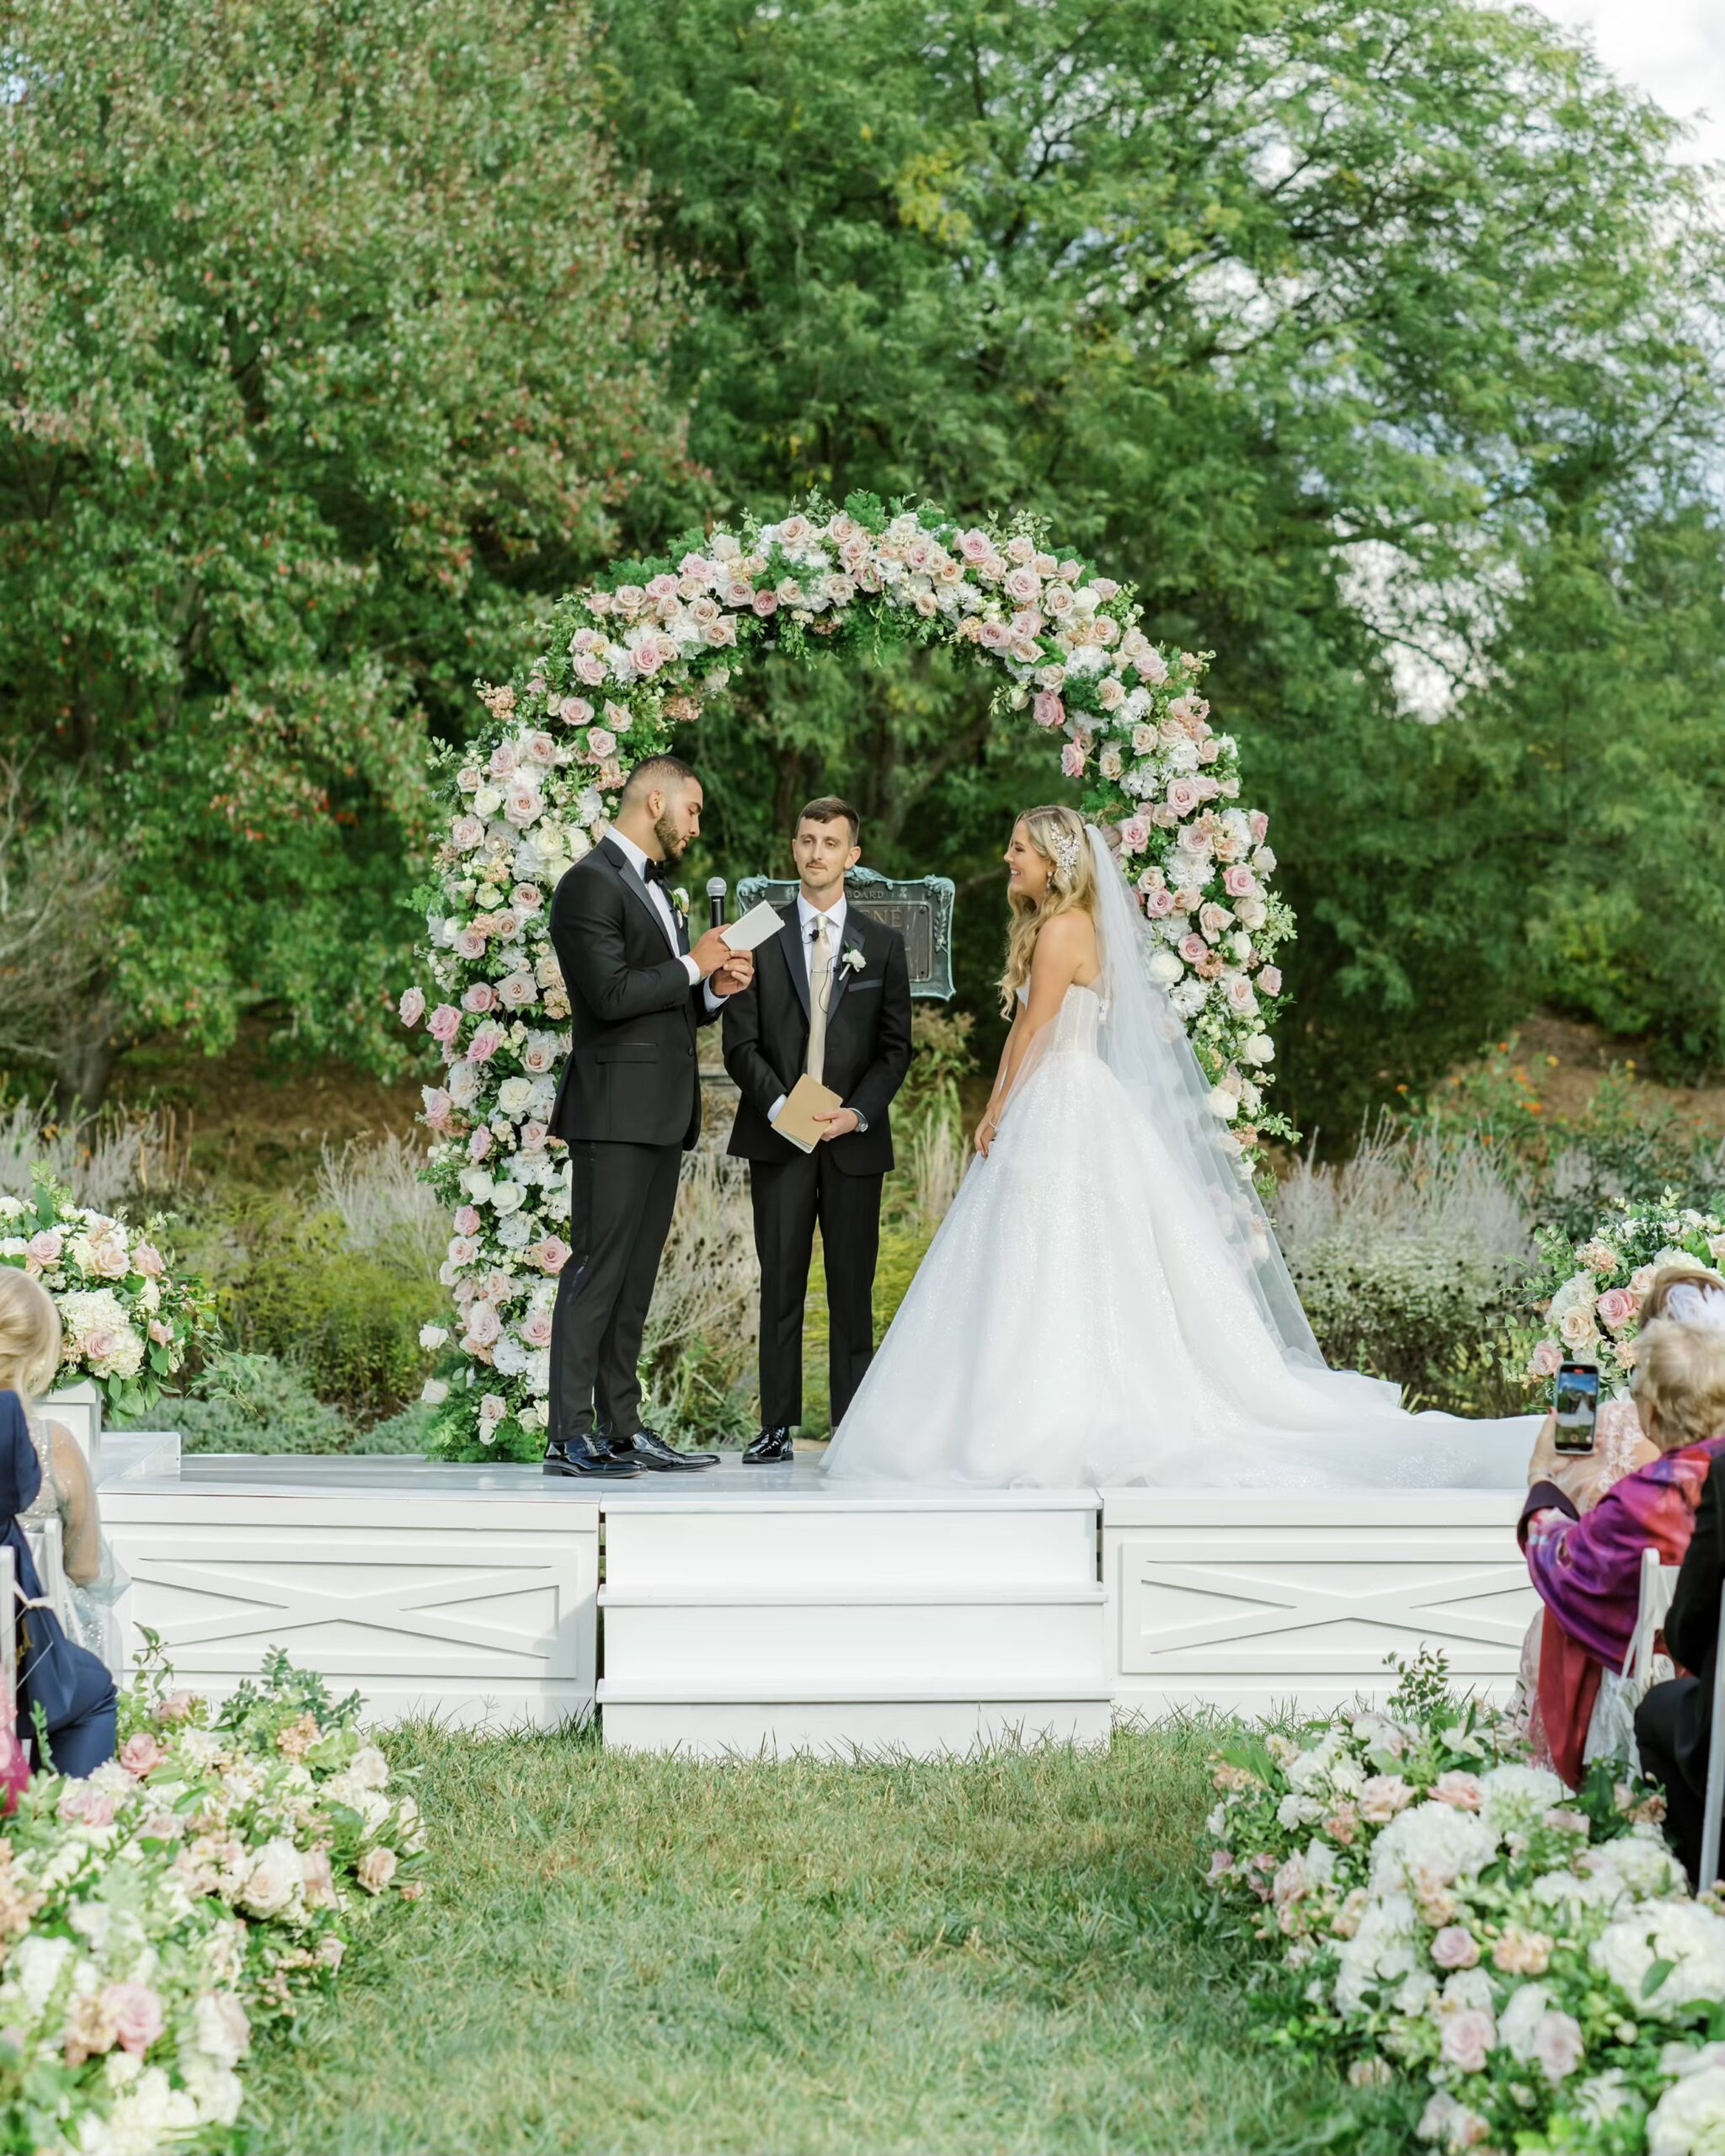 Bride and groom say vows at their Ault Park outdoor wedding ceremony